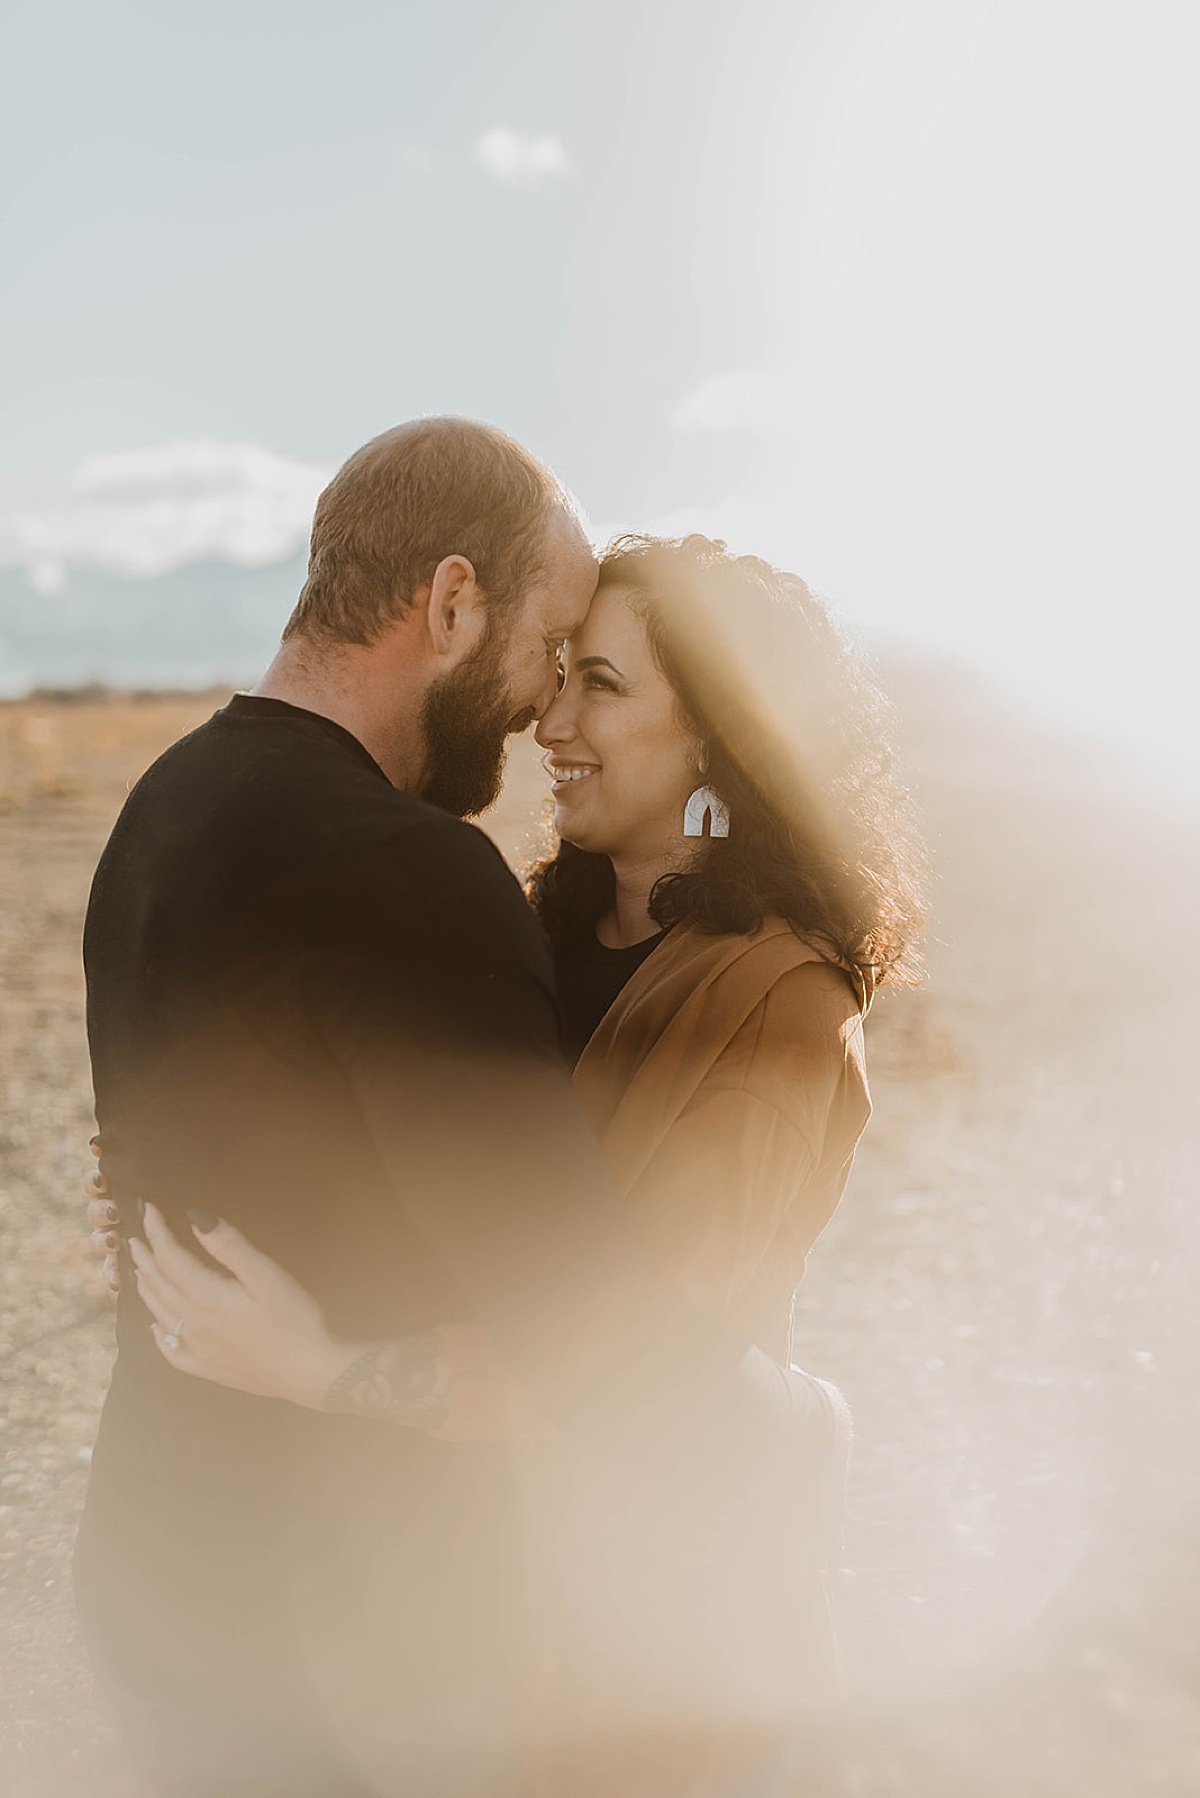  dreamy view of engaged couple embracing during photoshoot by Theresa McDonald Photography 